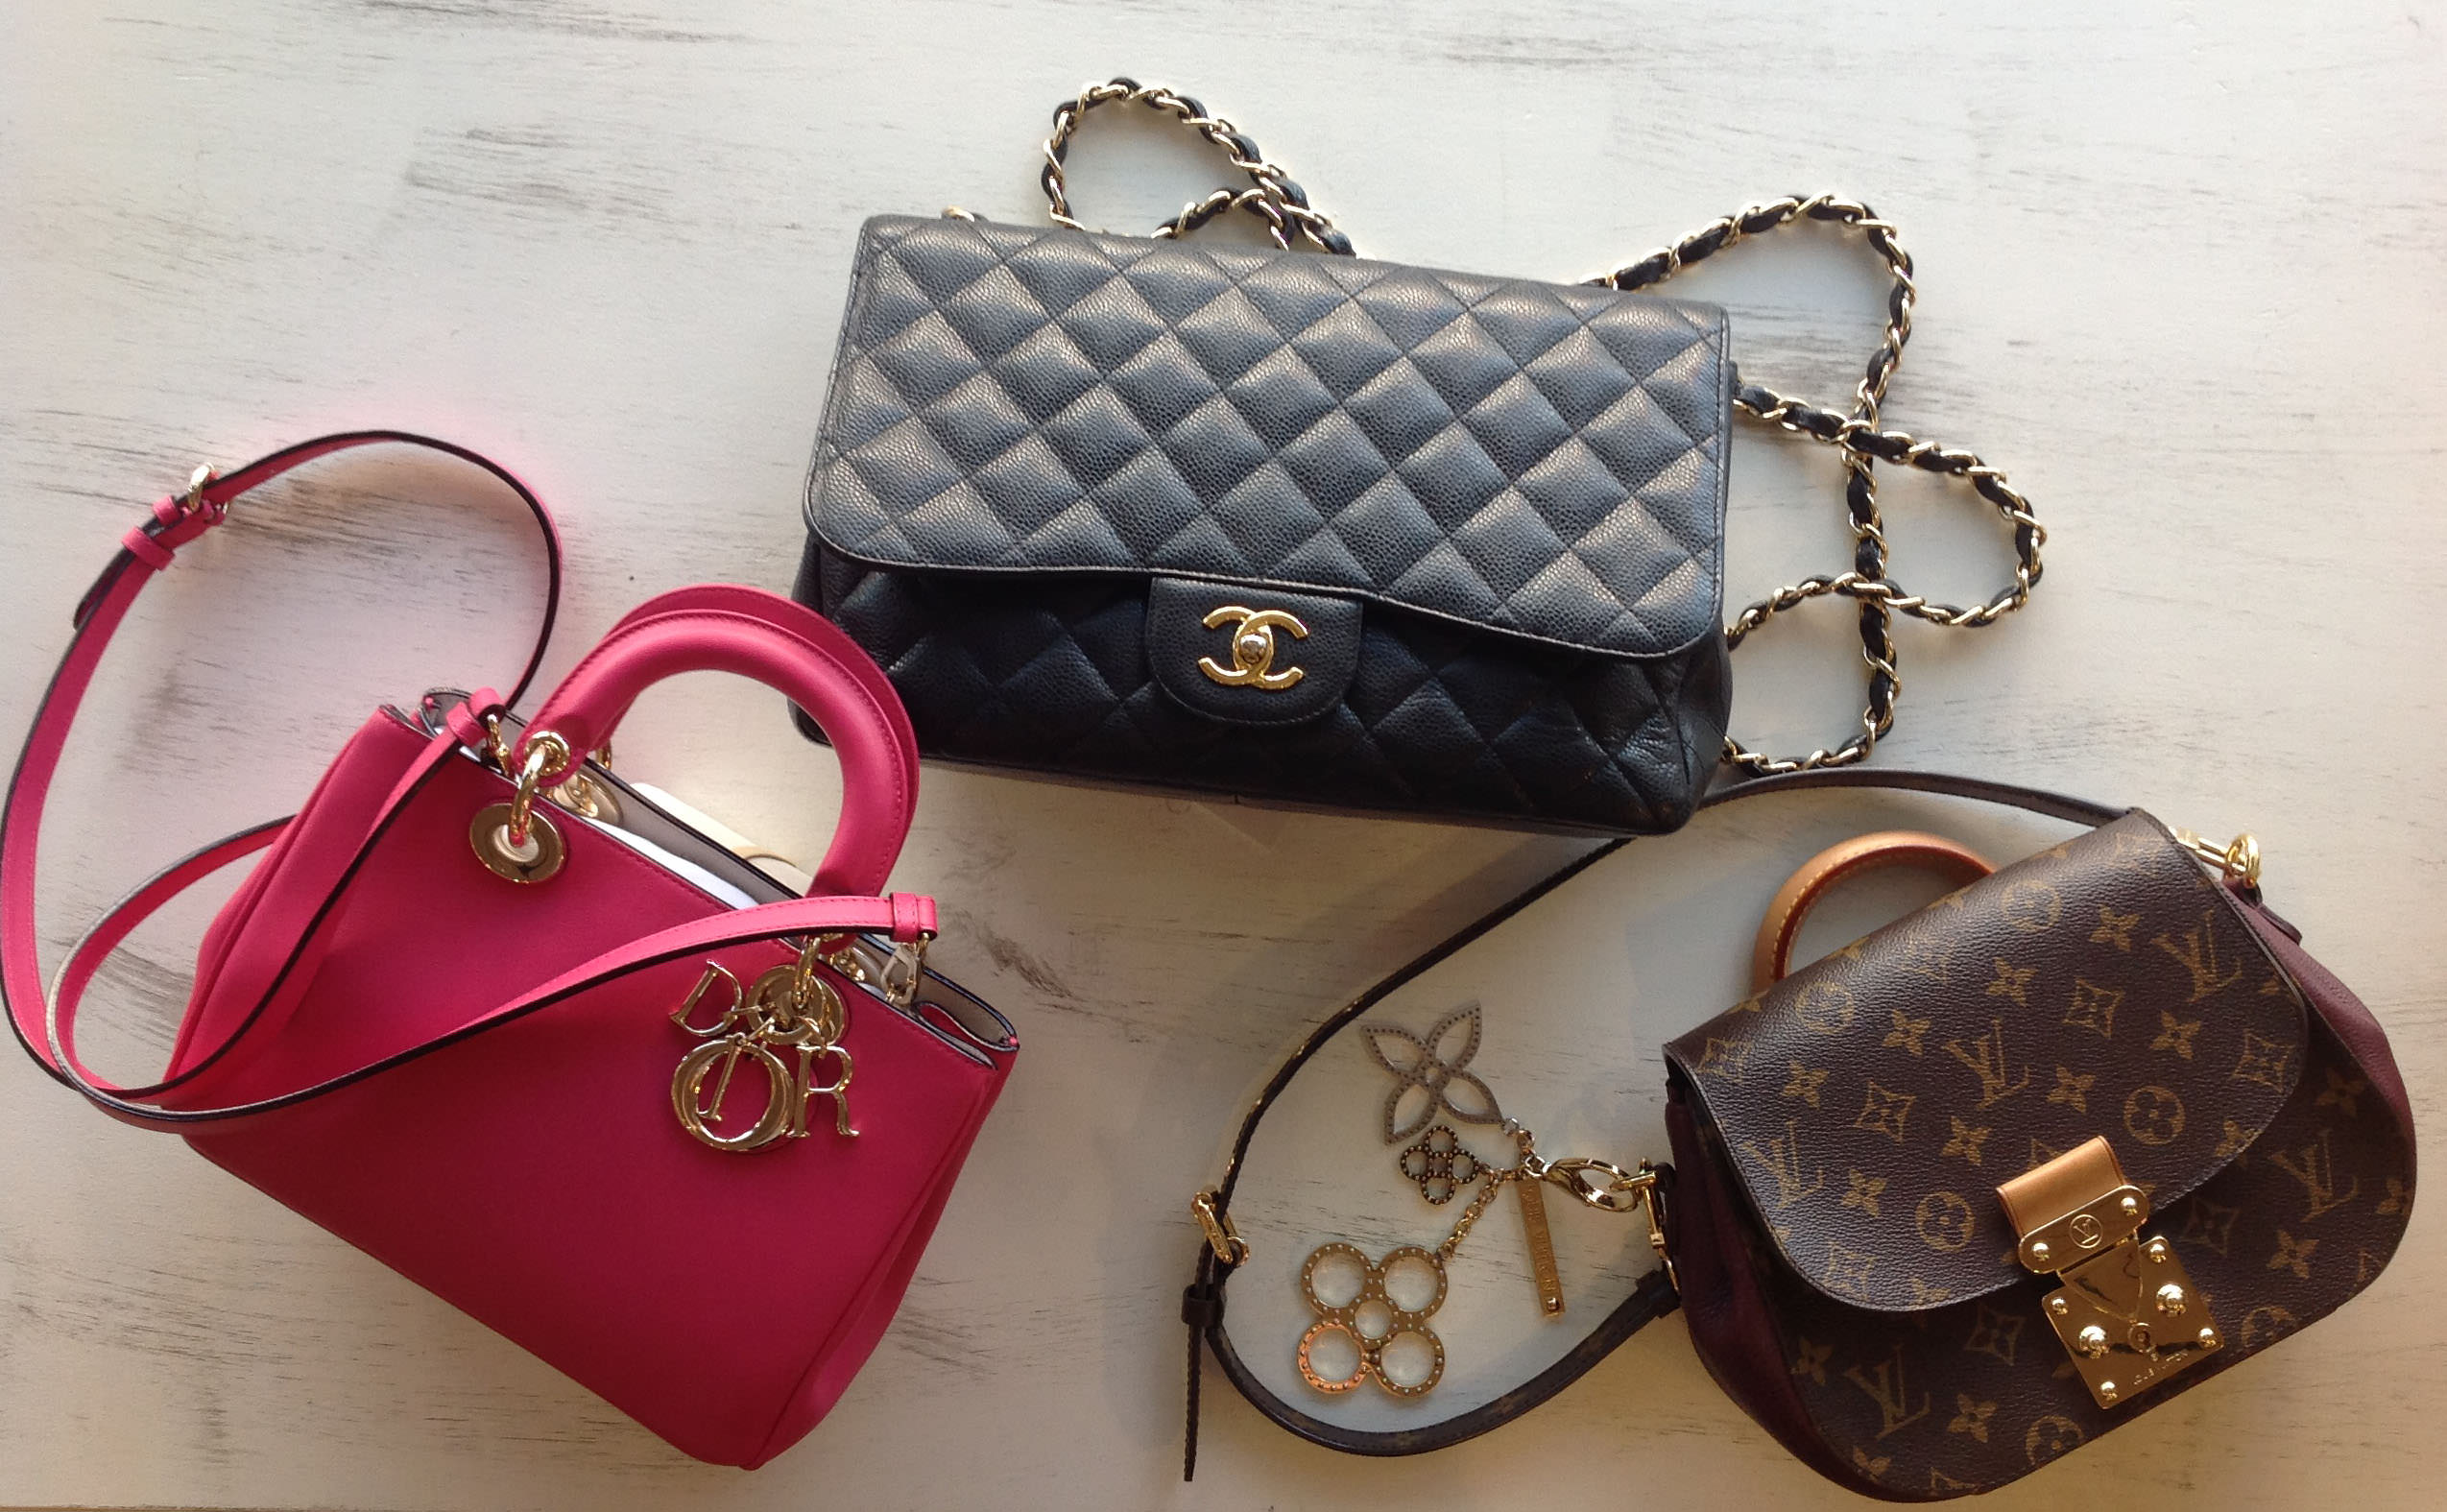 How To Get The Best Price When Selling Your Designer Handbag - Luxity